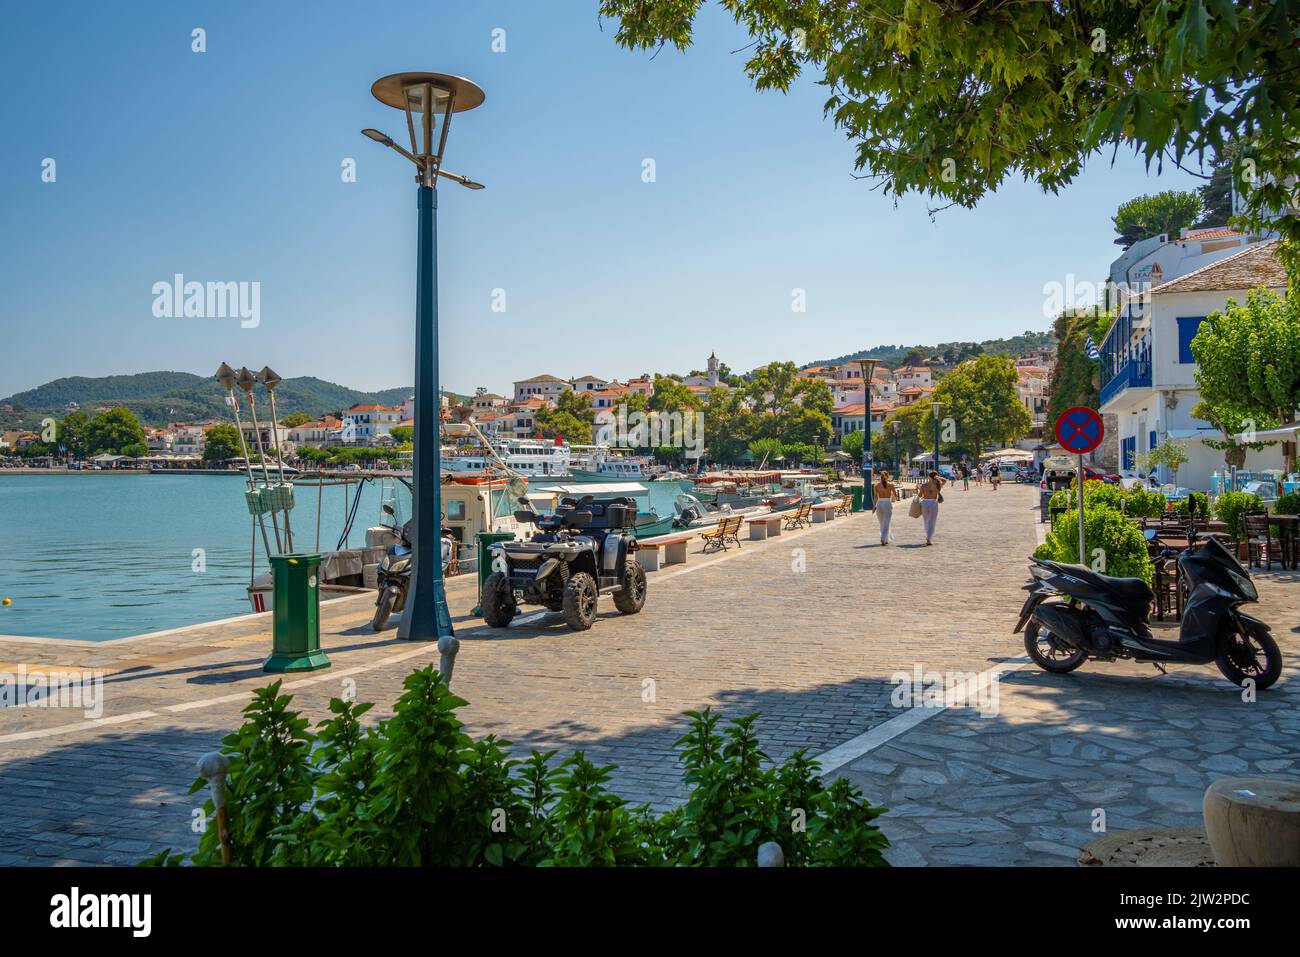 View of old town and promenade, Skopelos Town, Skopelos Island, Sporades Islands, Greek Islands, Greece, Europe Stock Photo